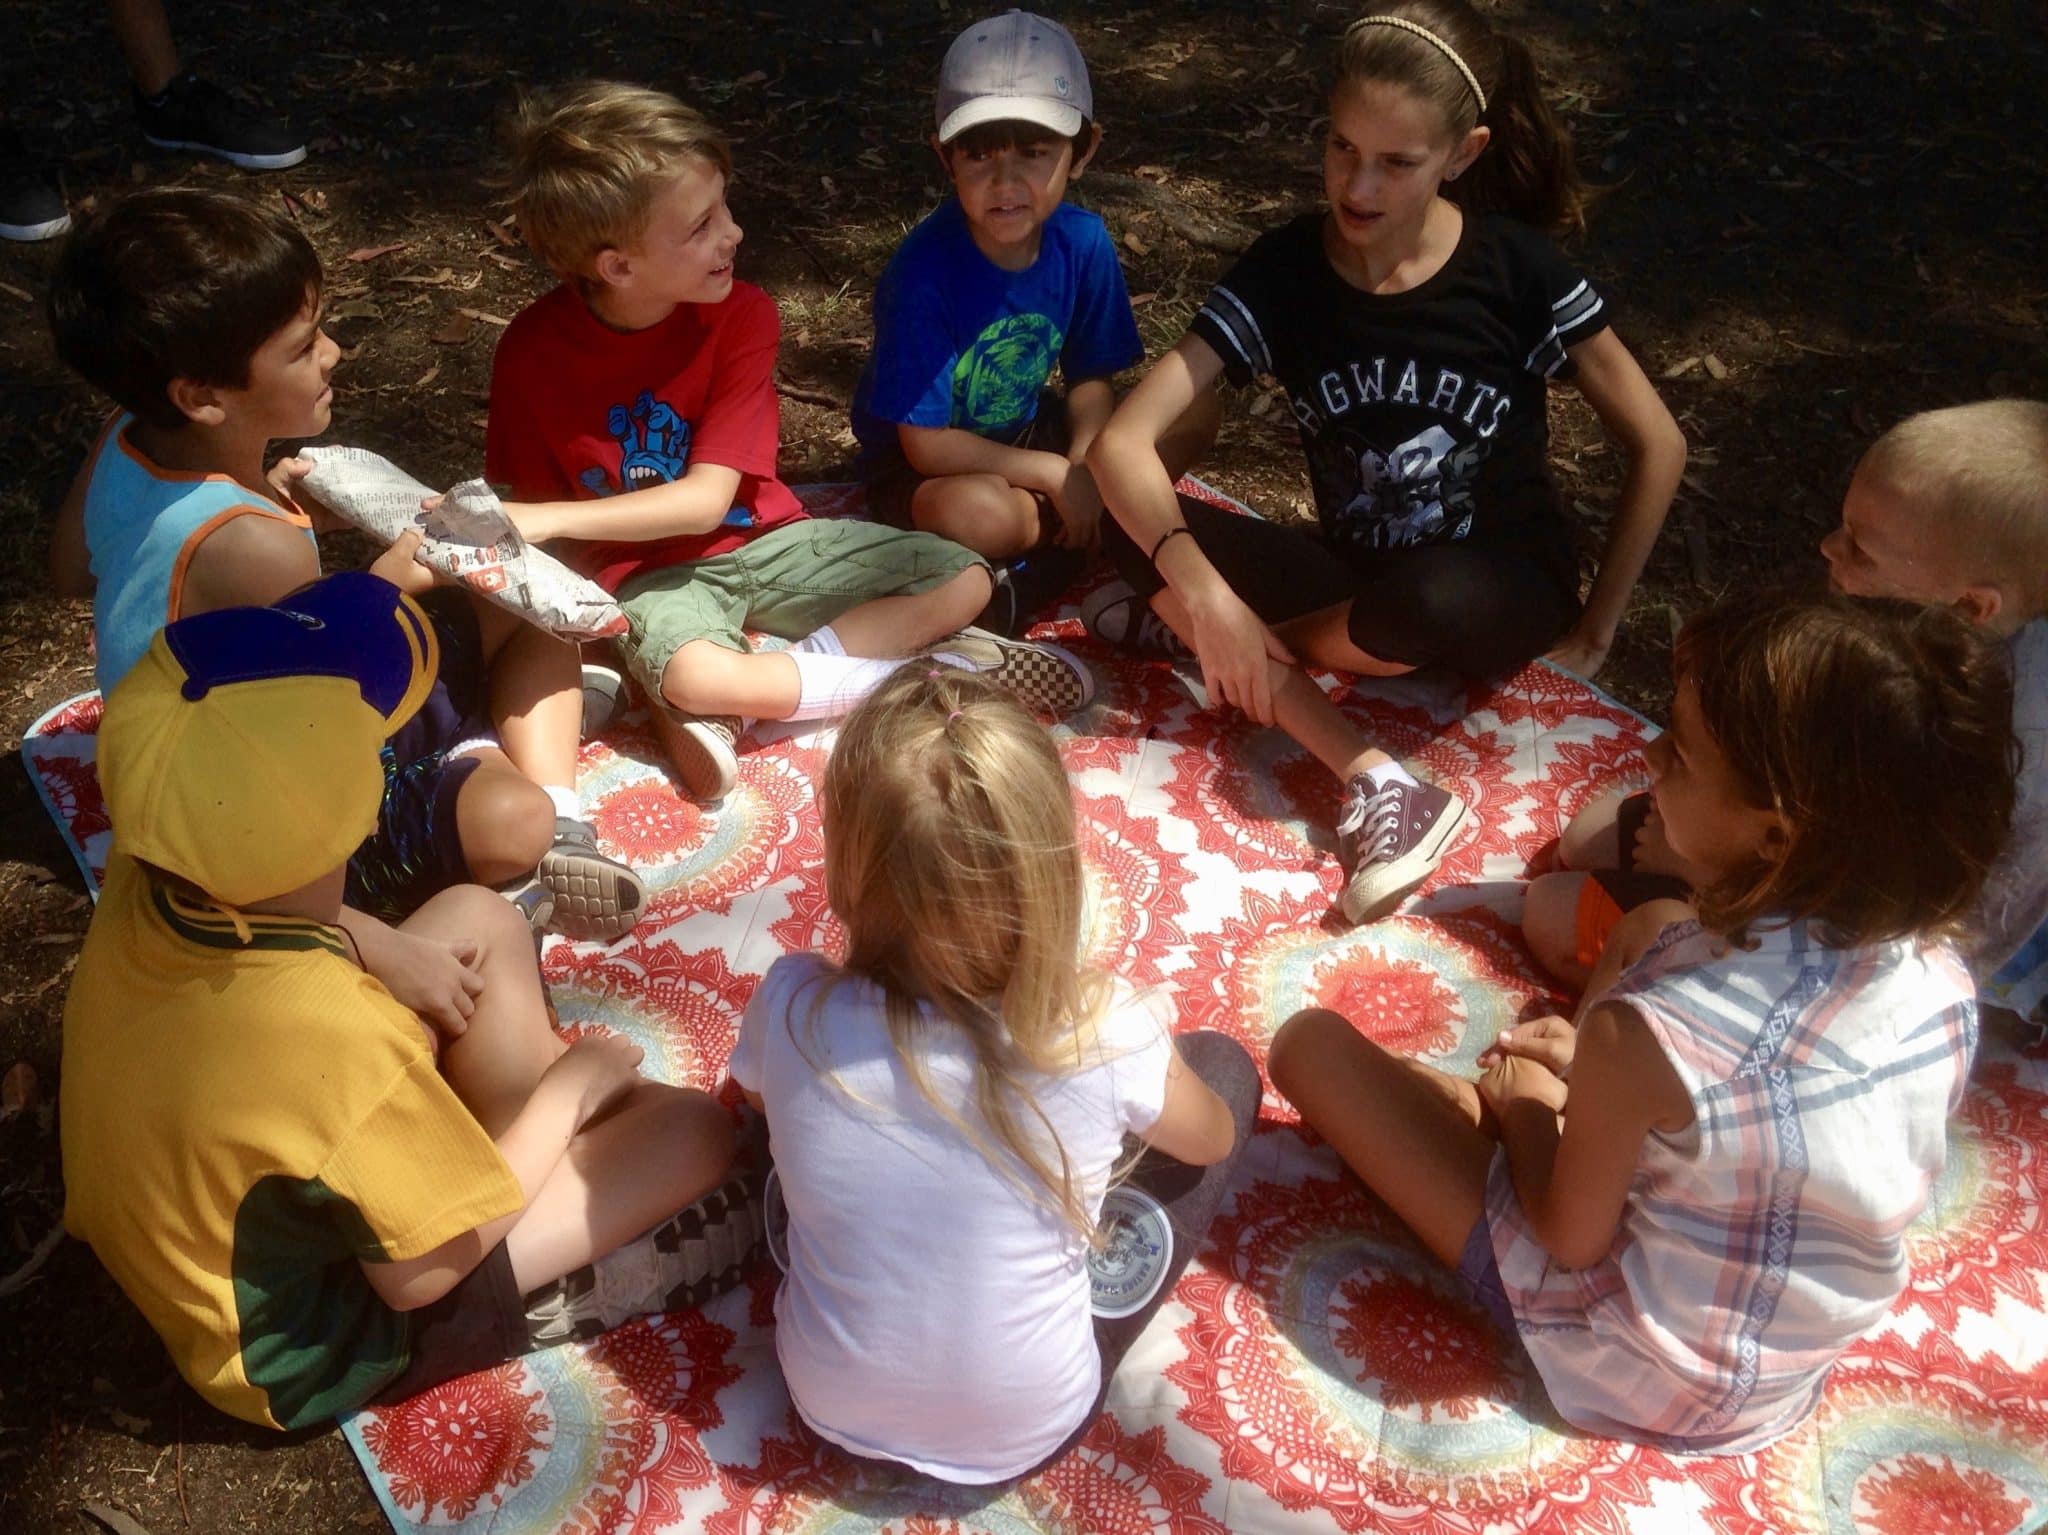 A group of children sitting on a blanket, enjoying a game of "Passing the Parcel